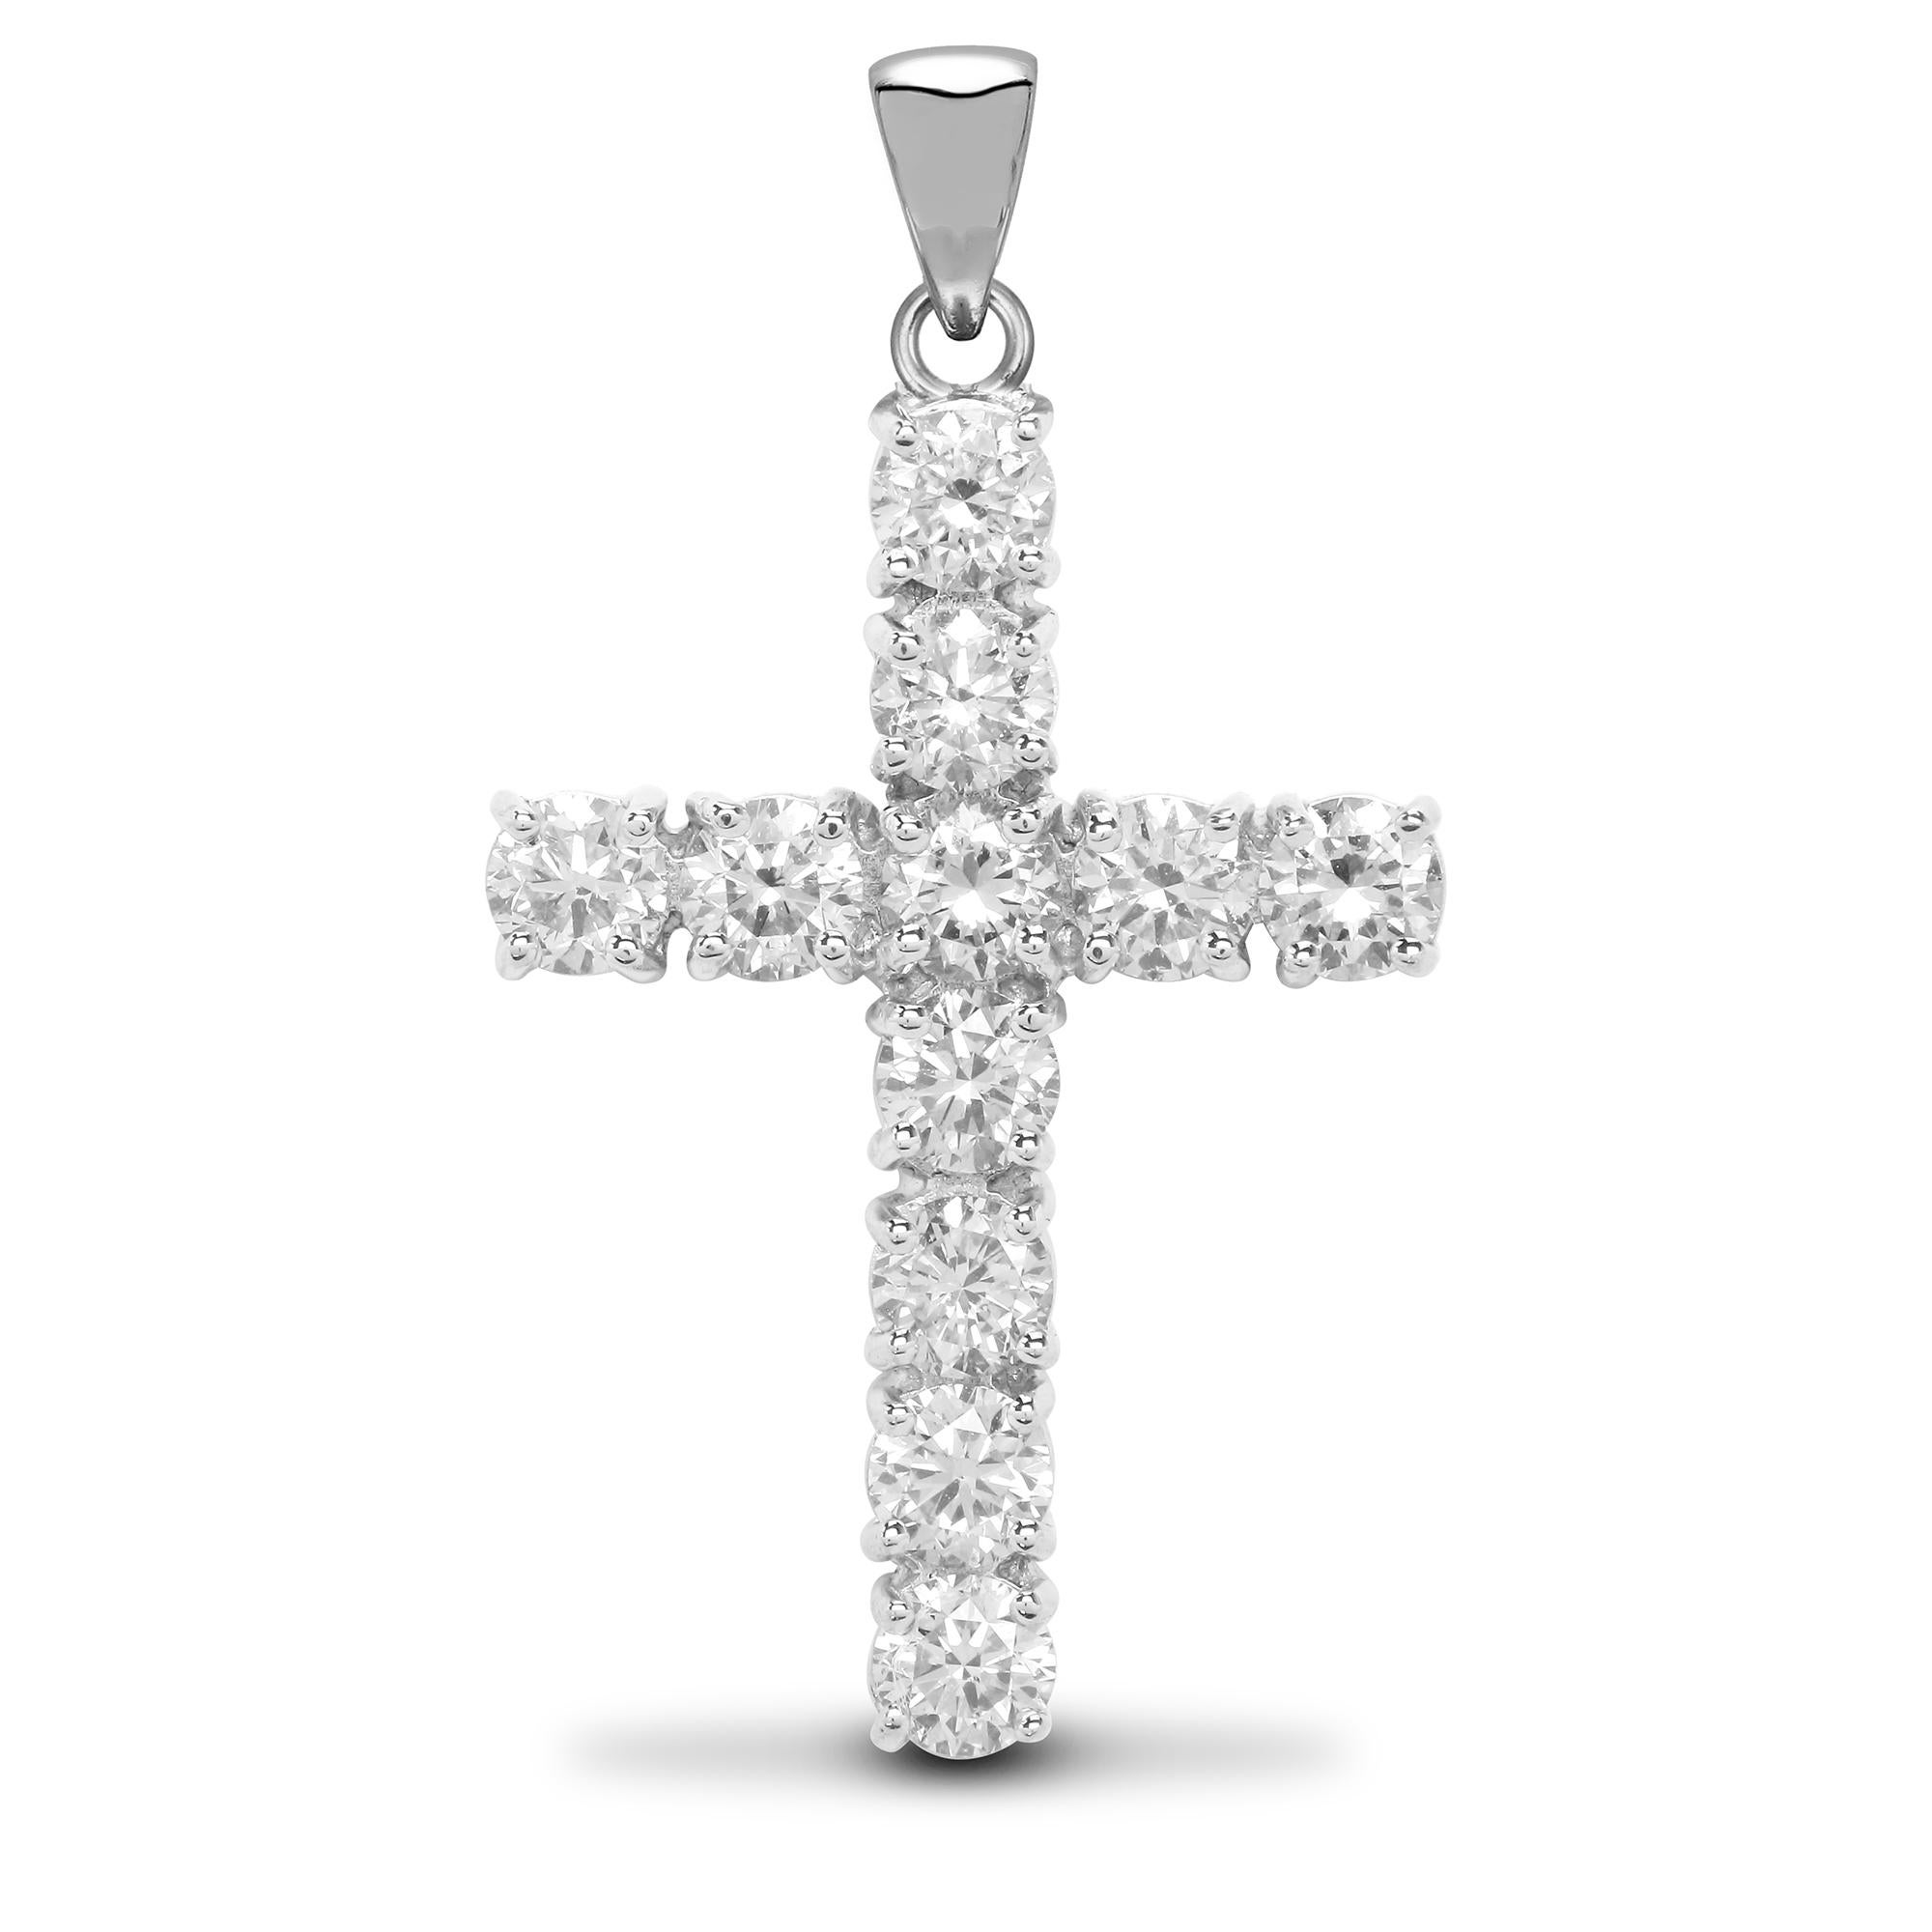 An elegant classic solitaire set diamond cross pendant, an ideal and timeless pendant, a must have addition to any jewellery collection. Skilfully hand crafted 18 karat white gold set with 11 natural white round brilliant cut diamonds color G and